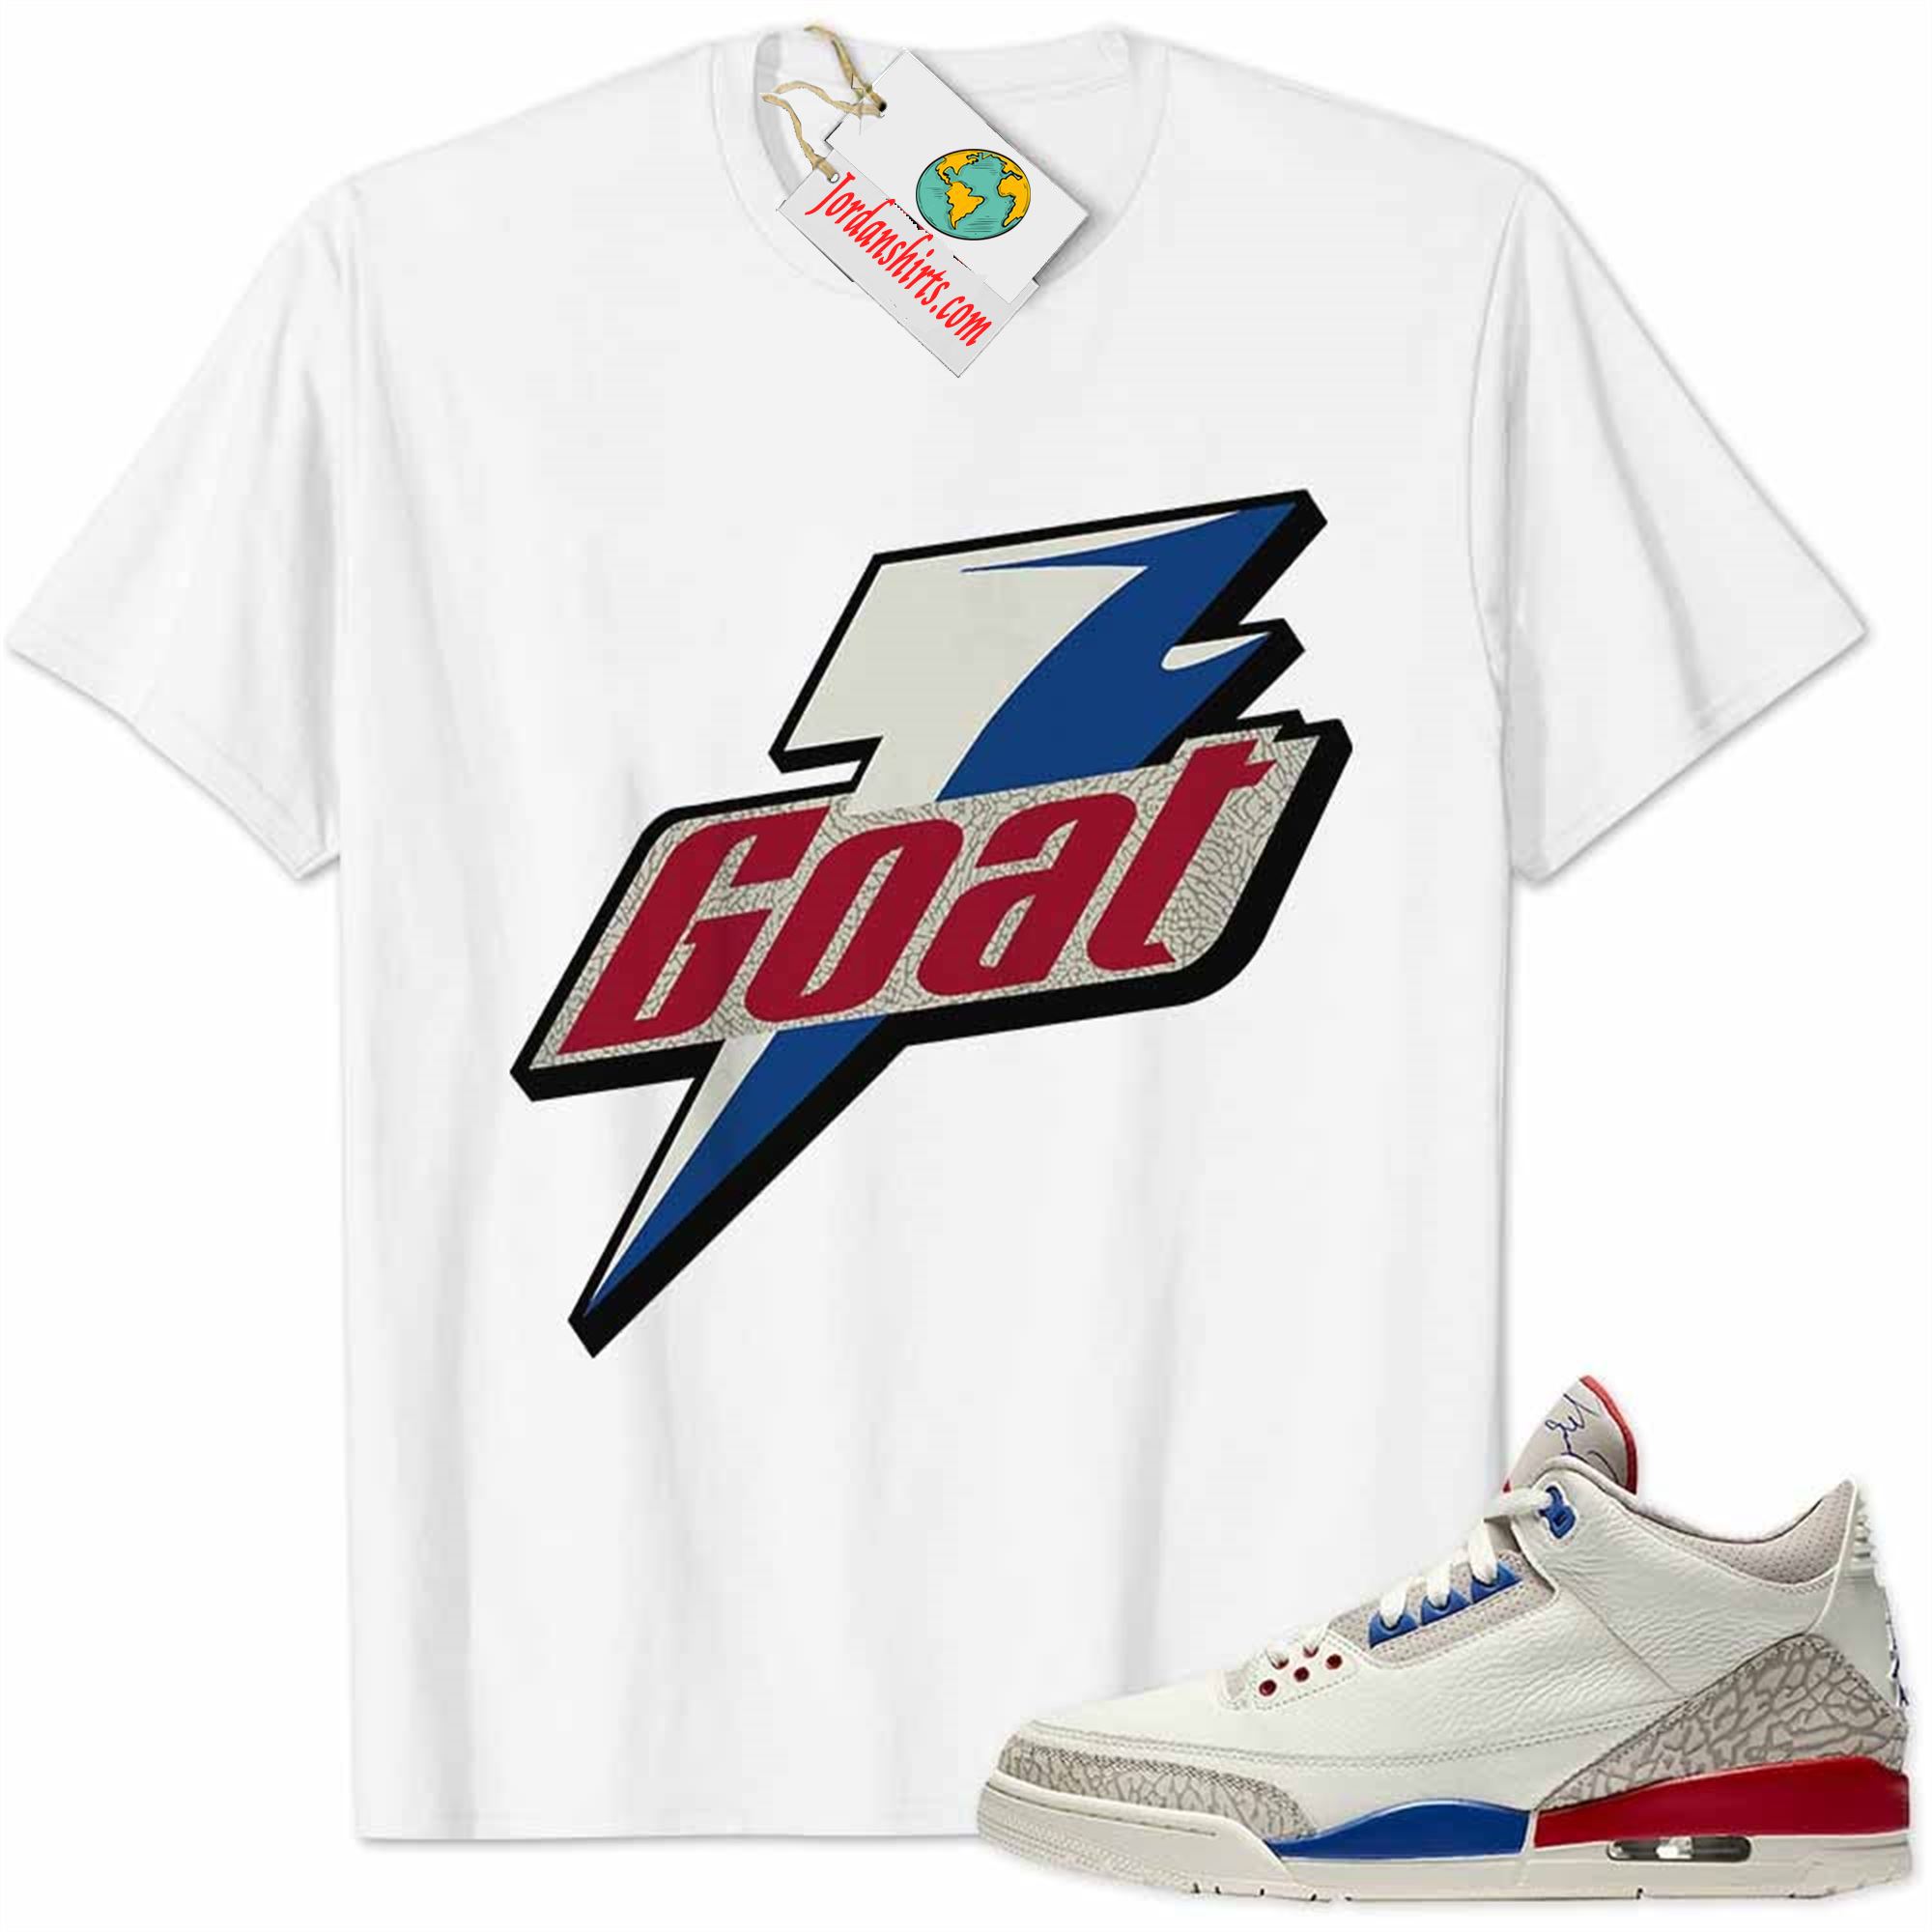 Jordan 3 Shirt, International Flight Charity Game 3s Shirt Goat Greatest Of All Time White Size Up To 5xl